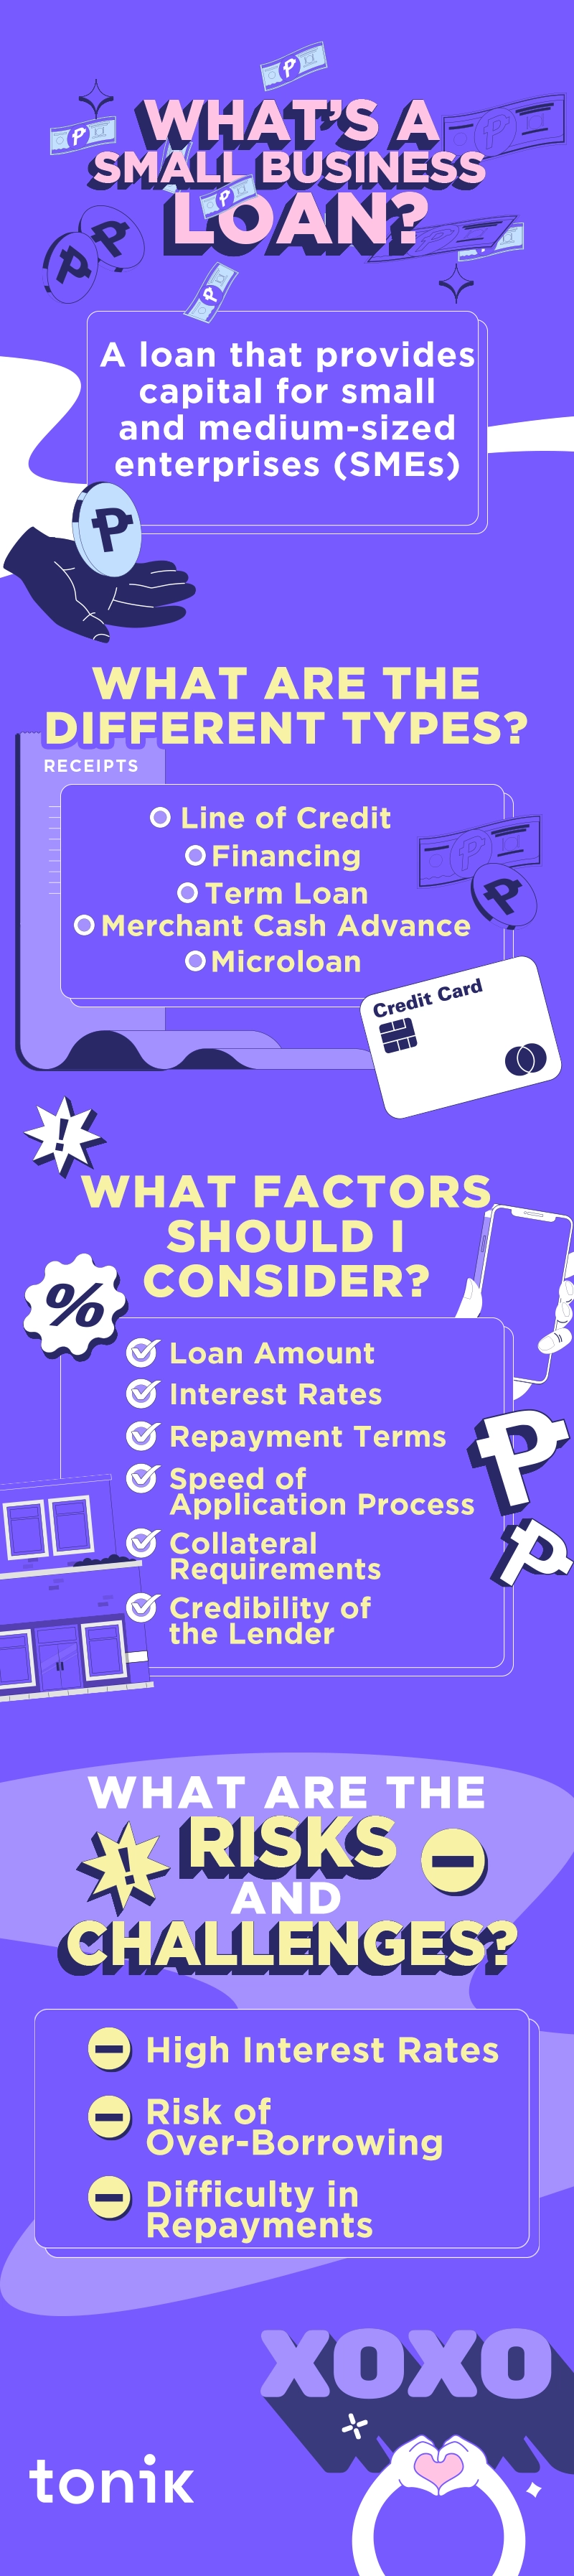 infographic on small business loan